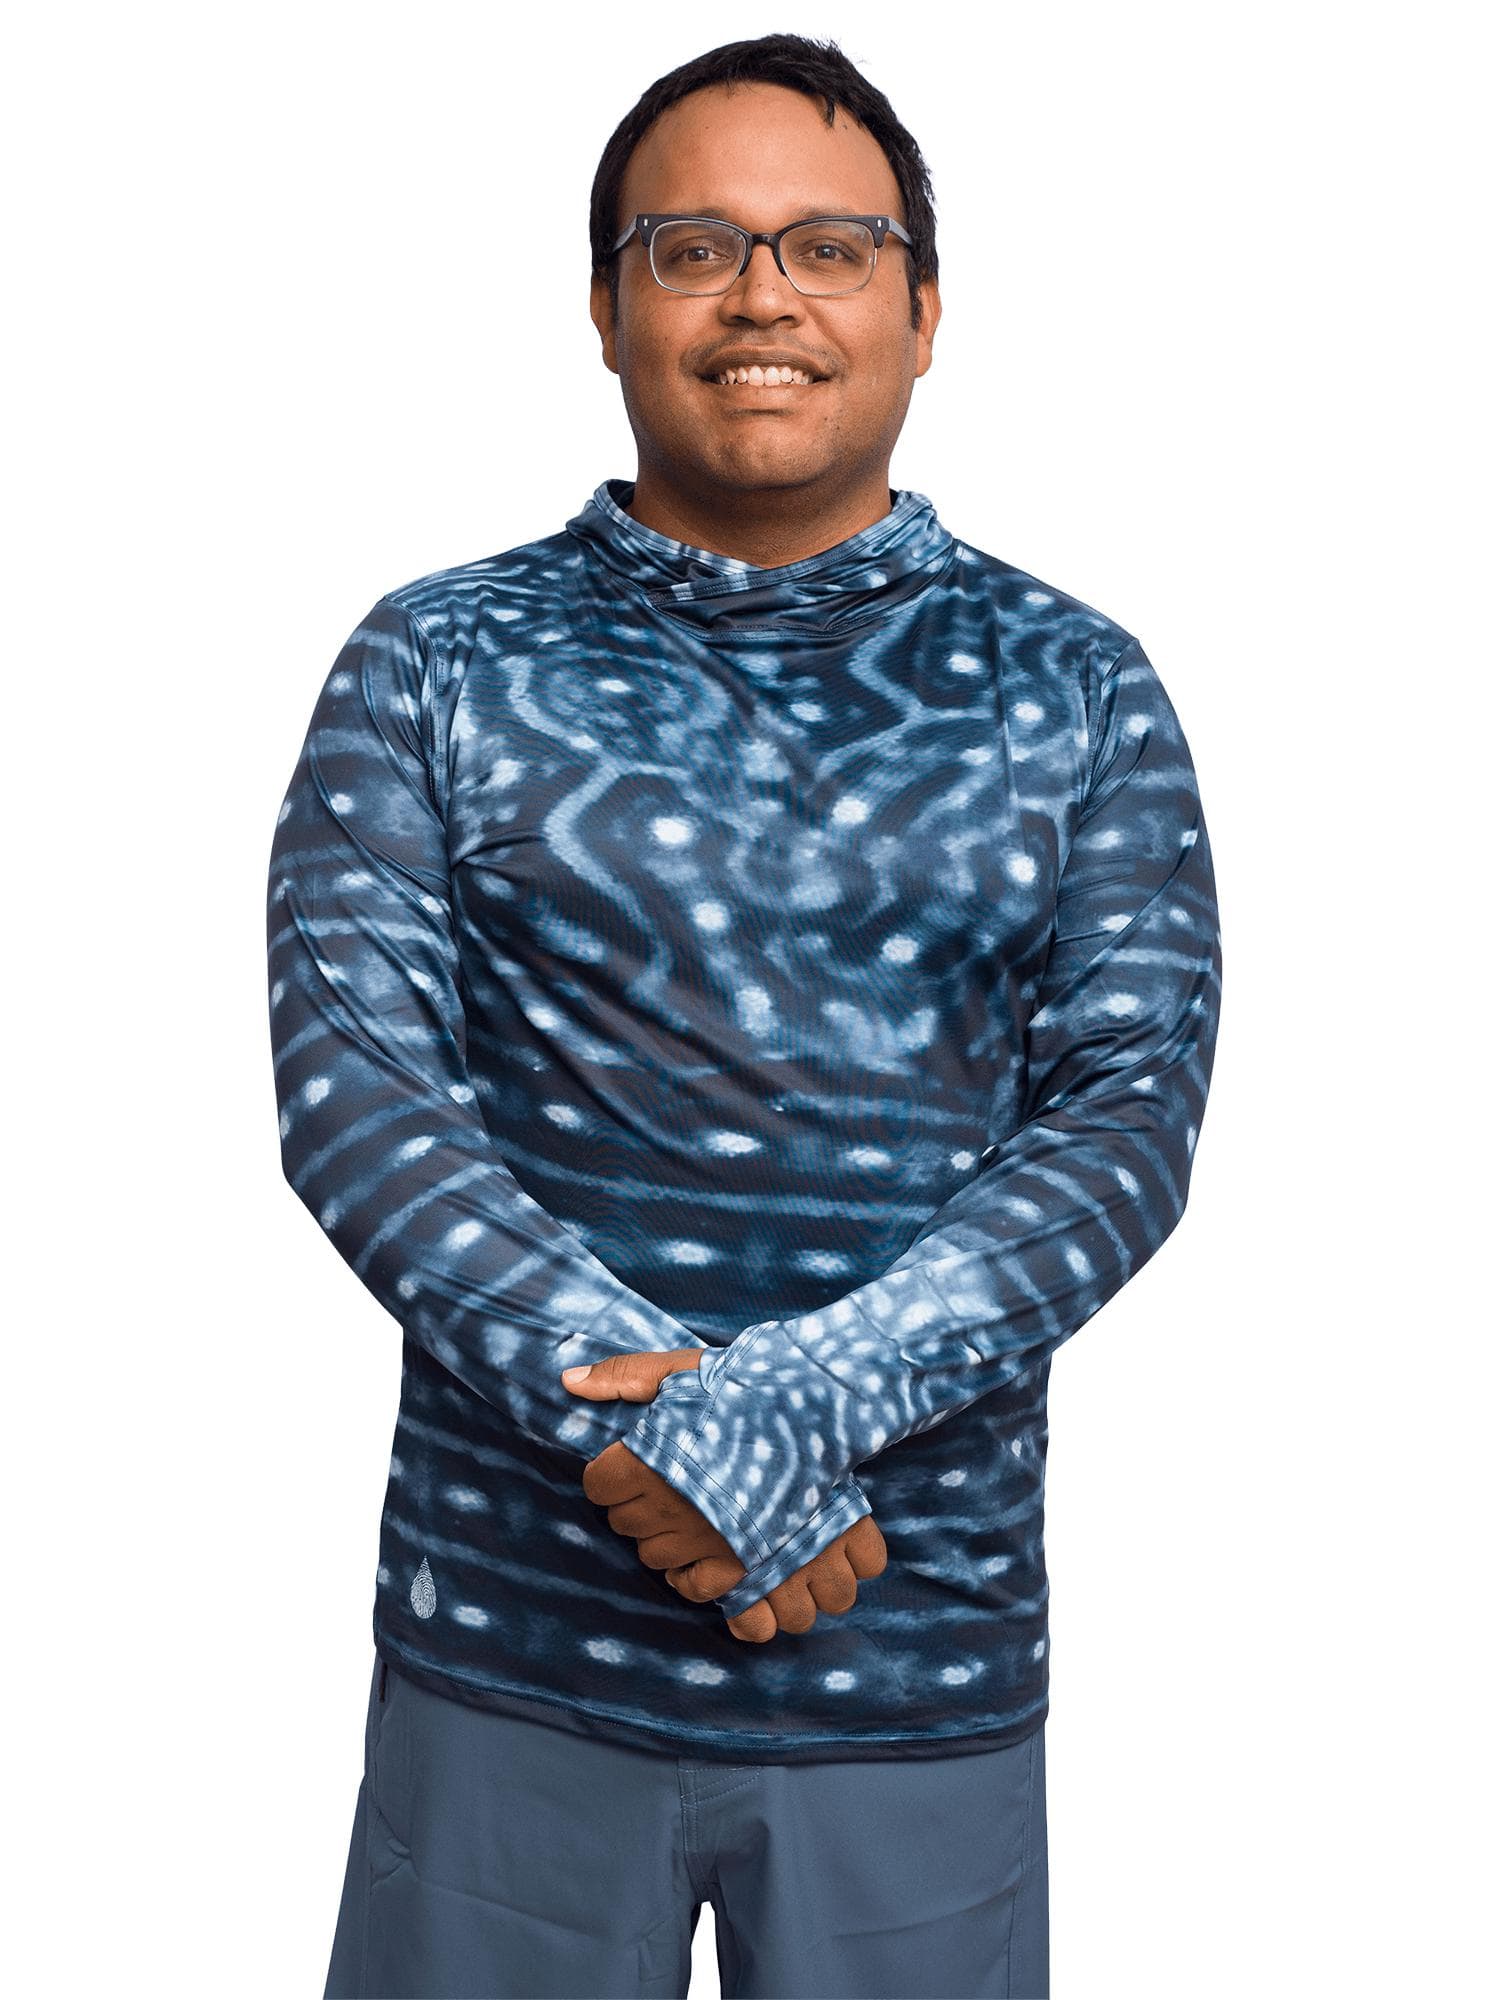 Model: Alberto is a professional sailor and filmmaker promoting youth participation in conservation and water sports. He is 6', 247lbs and wearing a size 2XL shirt and 39 boardshorts. 